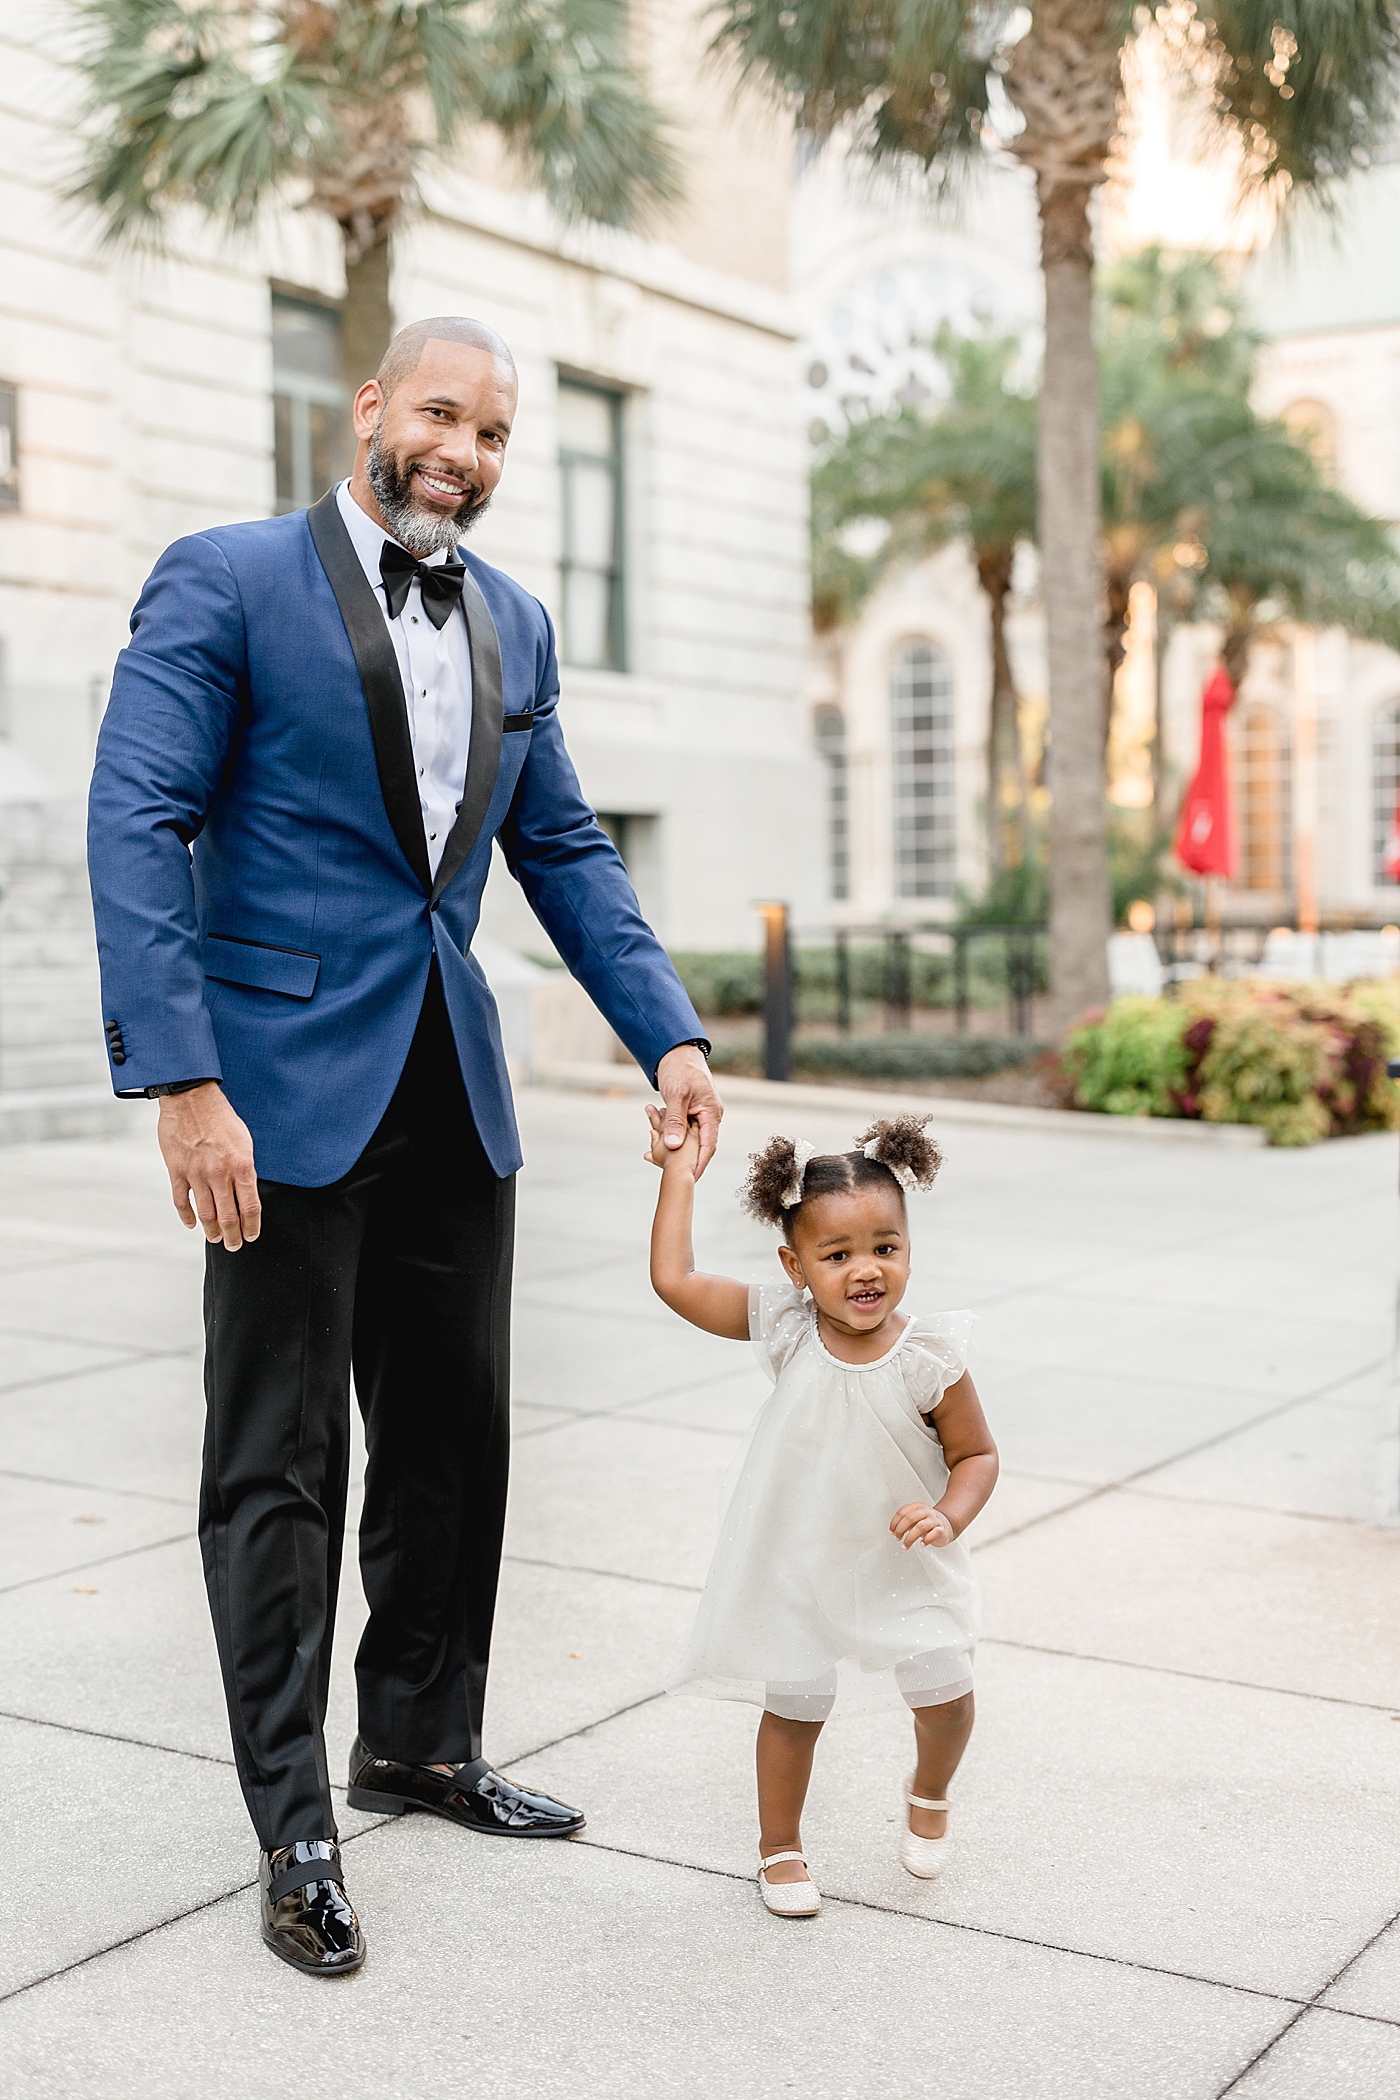 Two year old little girl holding her Dad's hands walking. Photos by Brittany Elise Photography.